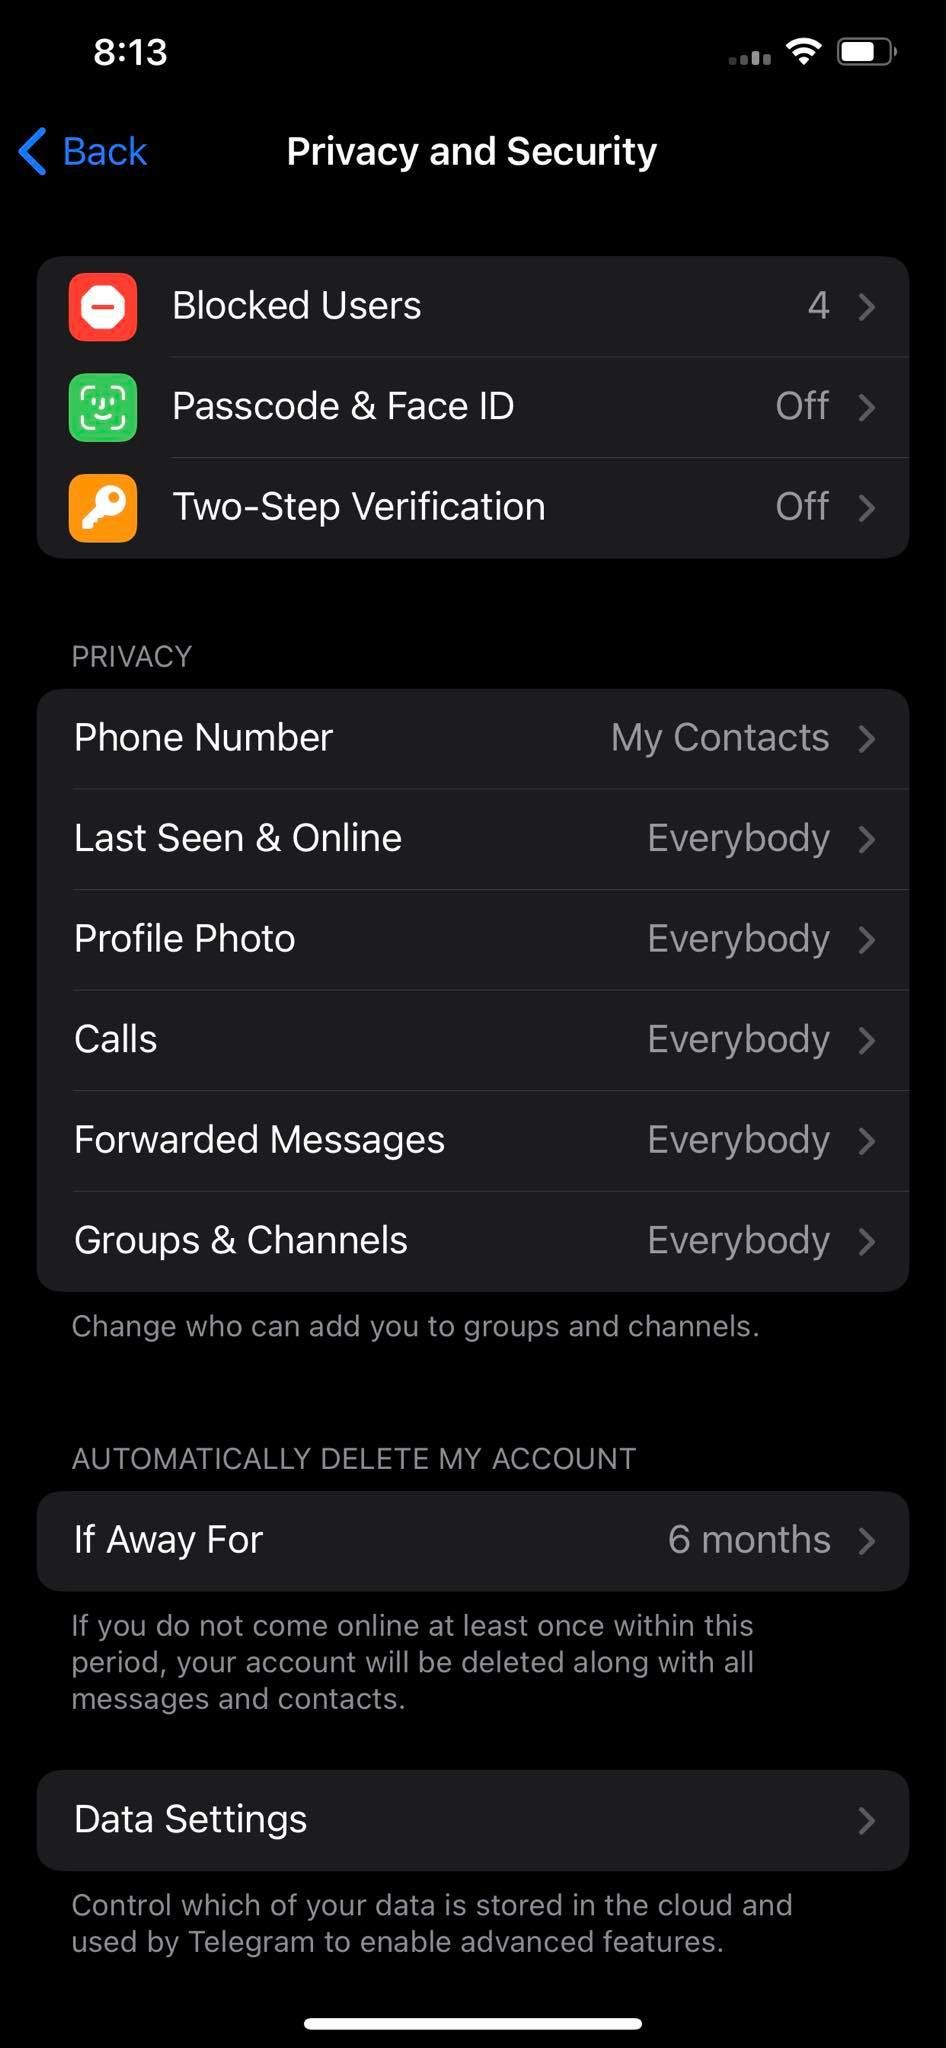 Privacy and Security Settings of Telegram App for iOS